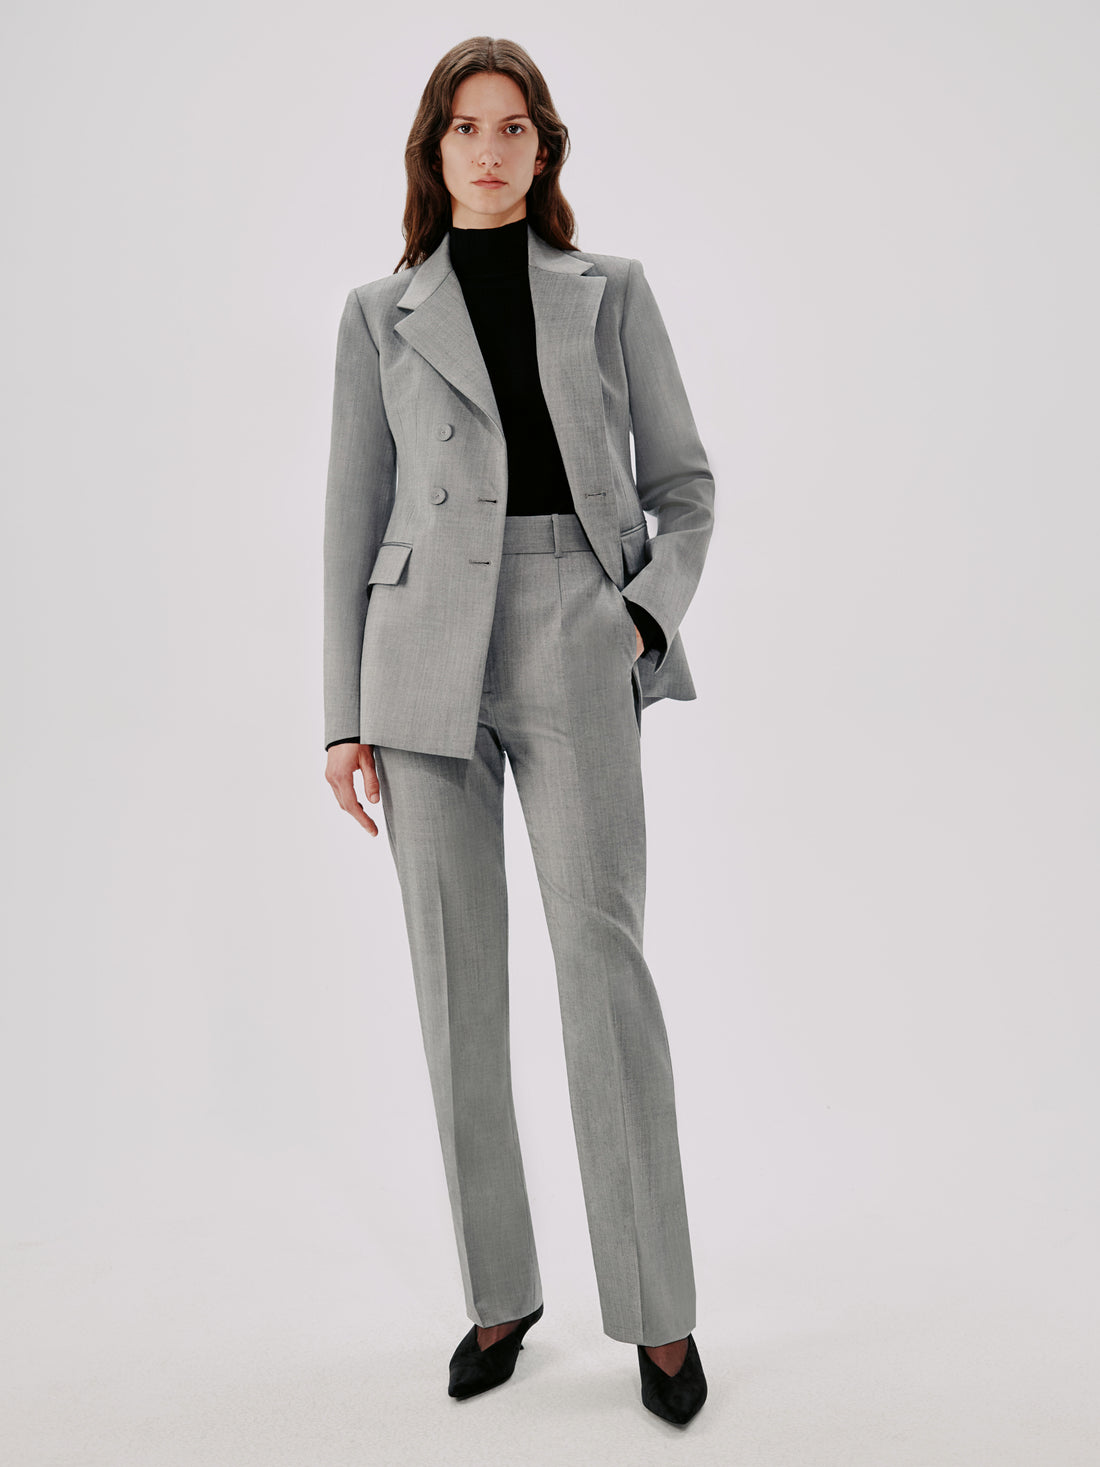 ZYSWP Grey Suit Pants Women's Spring and Autumn High Waist Slim Casual Pants  to Work Formal Wear Vertical Straight Pants (Color : Grey, Size : L Code) :  : Clothing, Shoes & Accessories